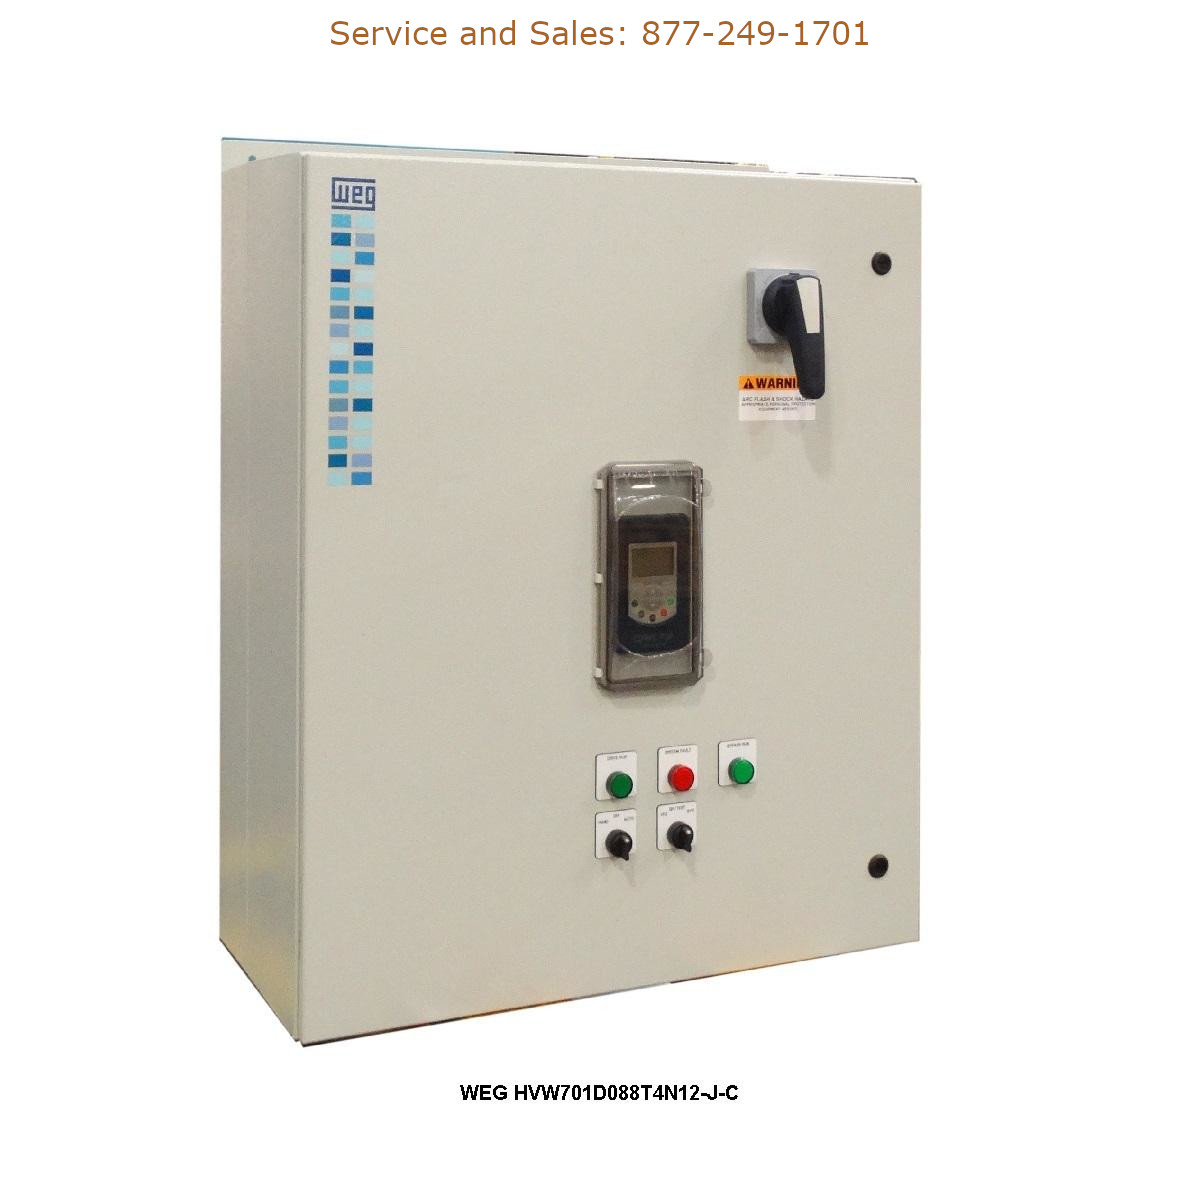 WEG HVW701D088T4N12-J-C WEG Model Number HVW701D088T4N12-J-C WEG Drives, Variable Speed Drives Repair Service, Troubleshooting, Replacement Parts https://gesrepair.com/wp-content/uploads/2022/WEG/WEG_HVW701D088T4N12-J-C_Drives_Variable_Speed_Drives.jpg